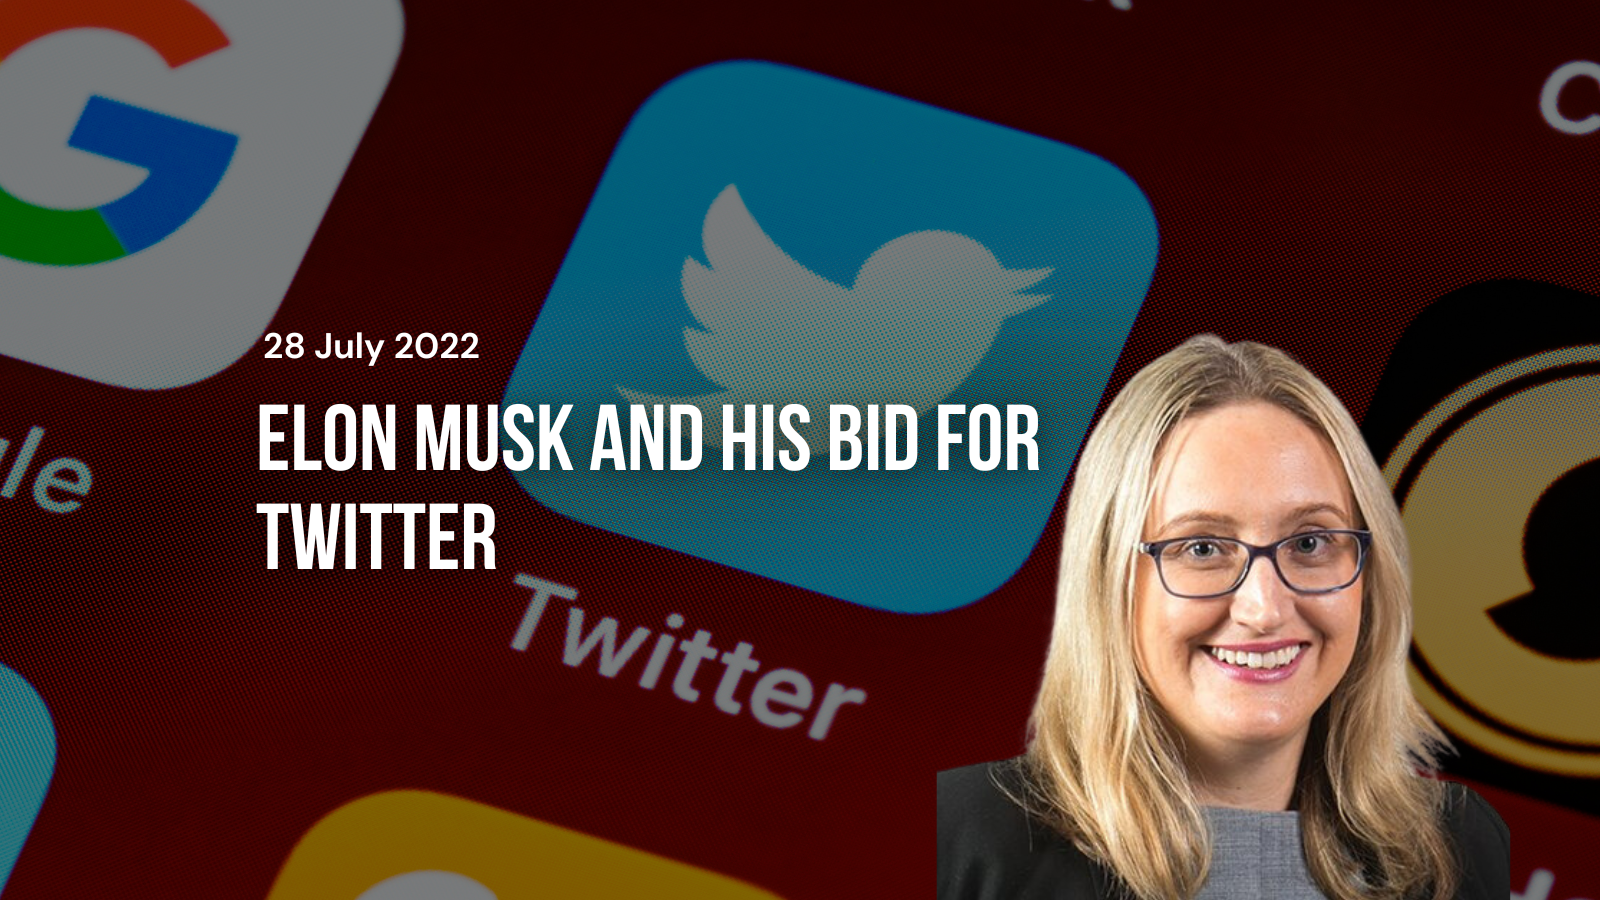 Elon Musk and his bid for Twitter